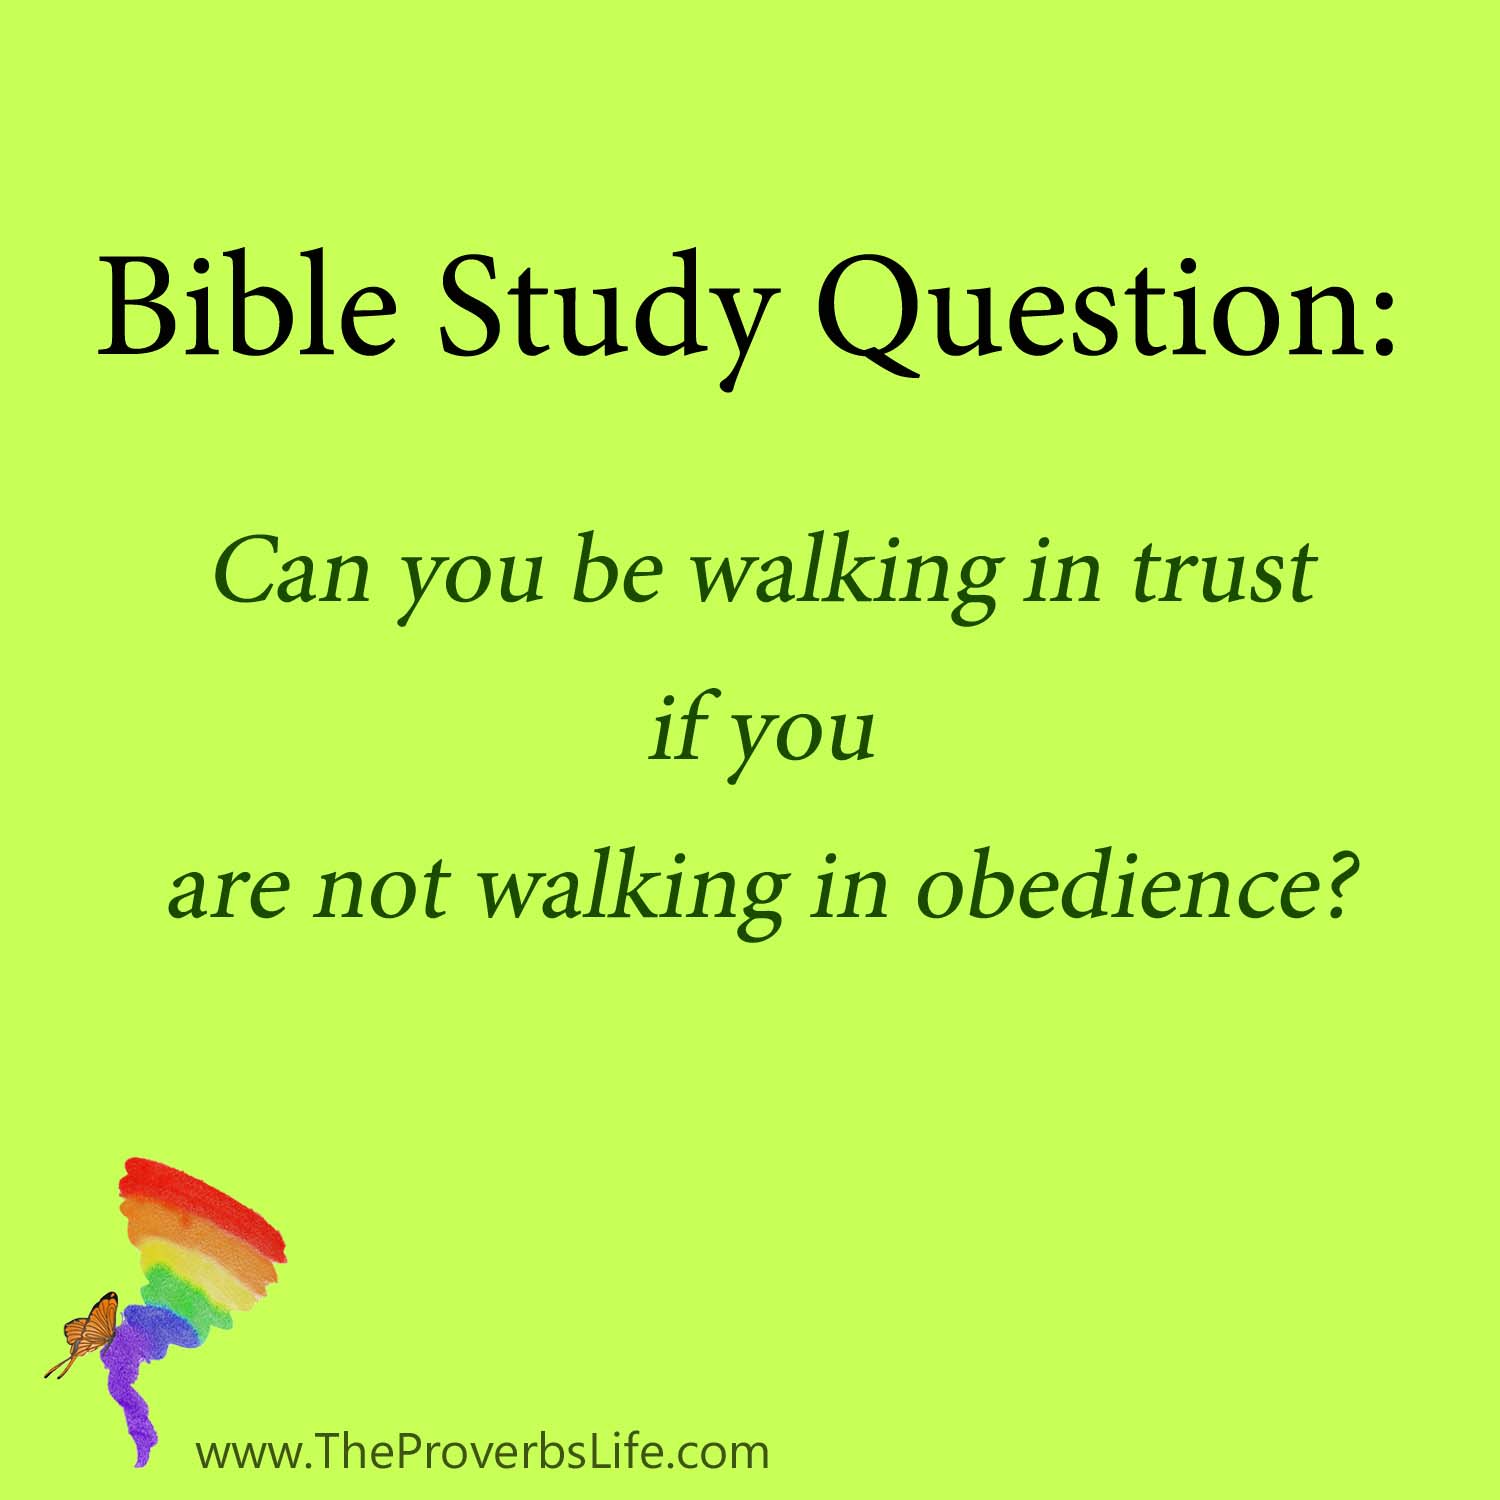 Bible Study Question - walking in obedience